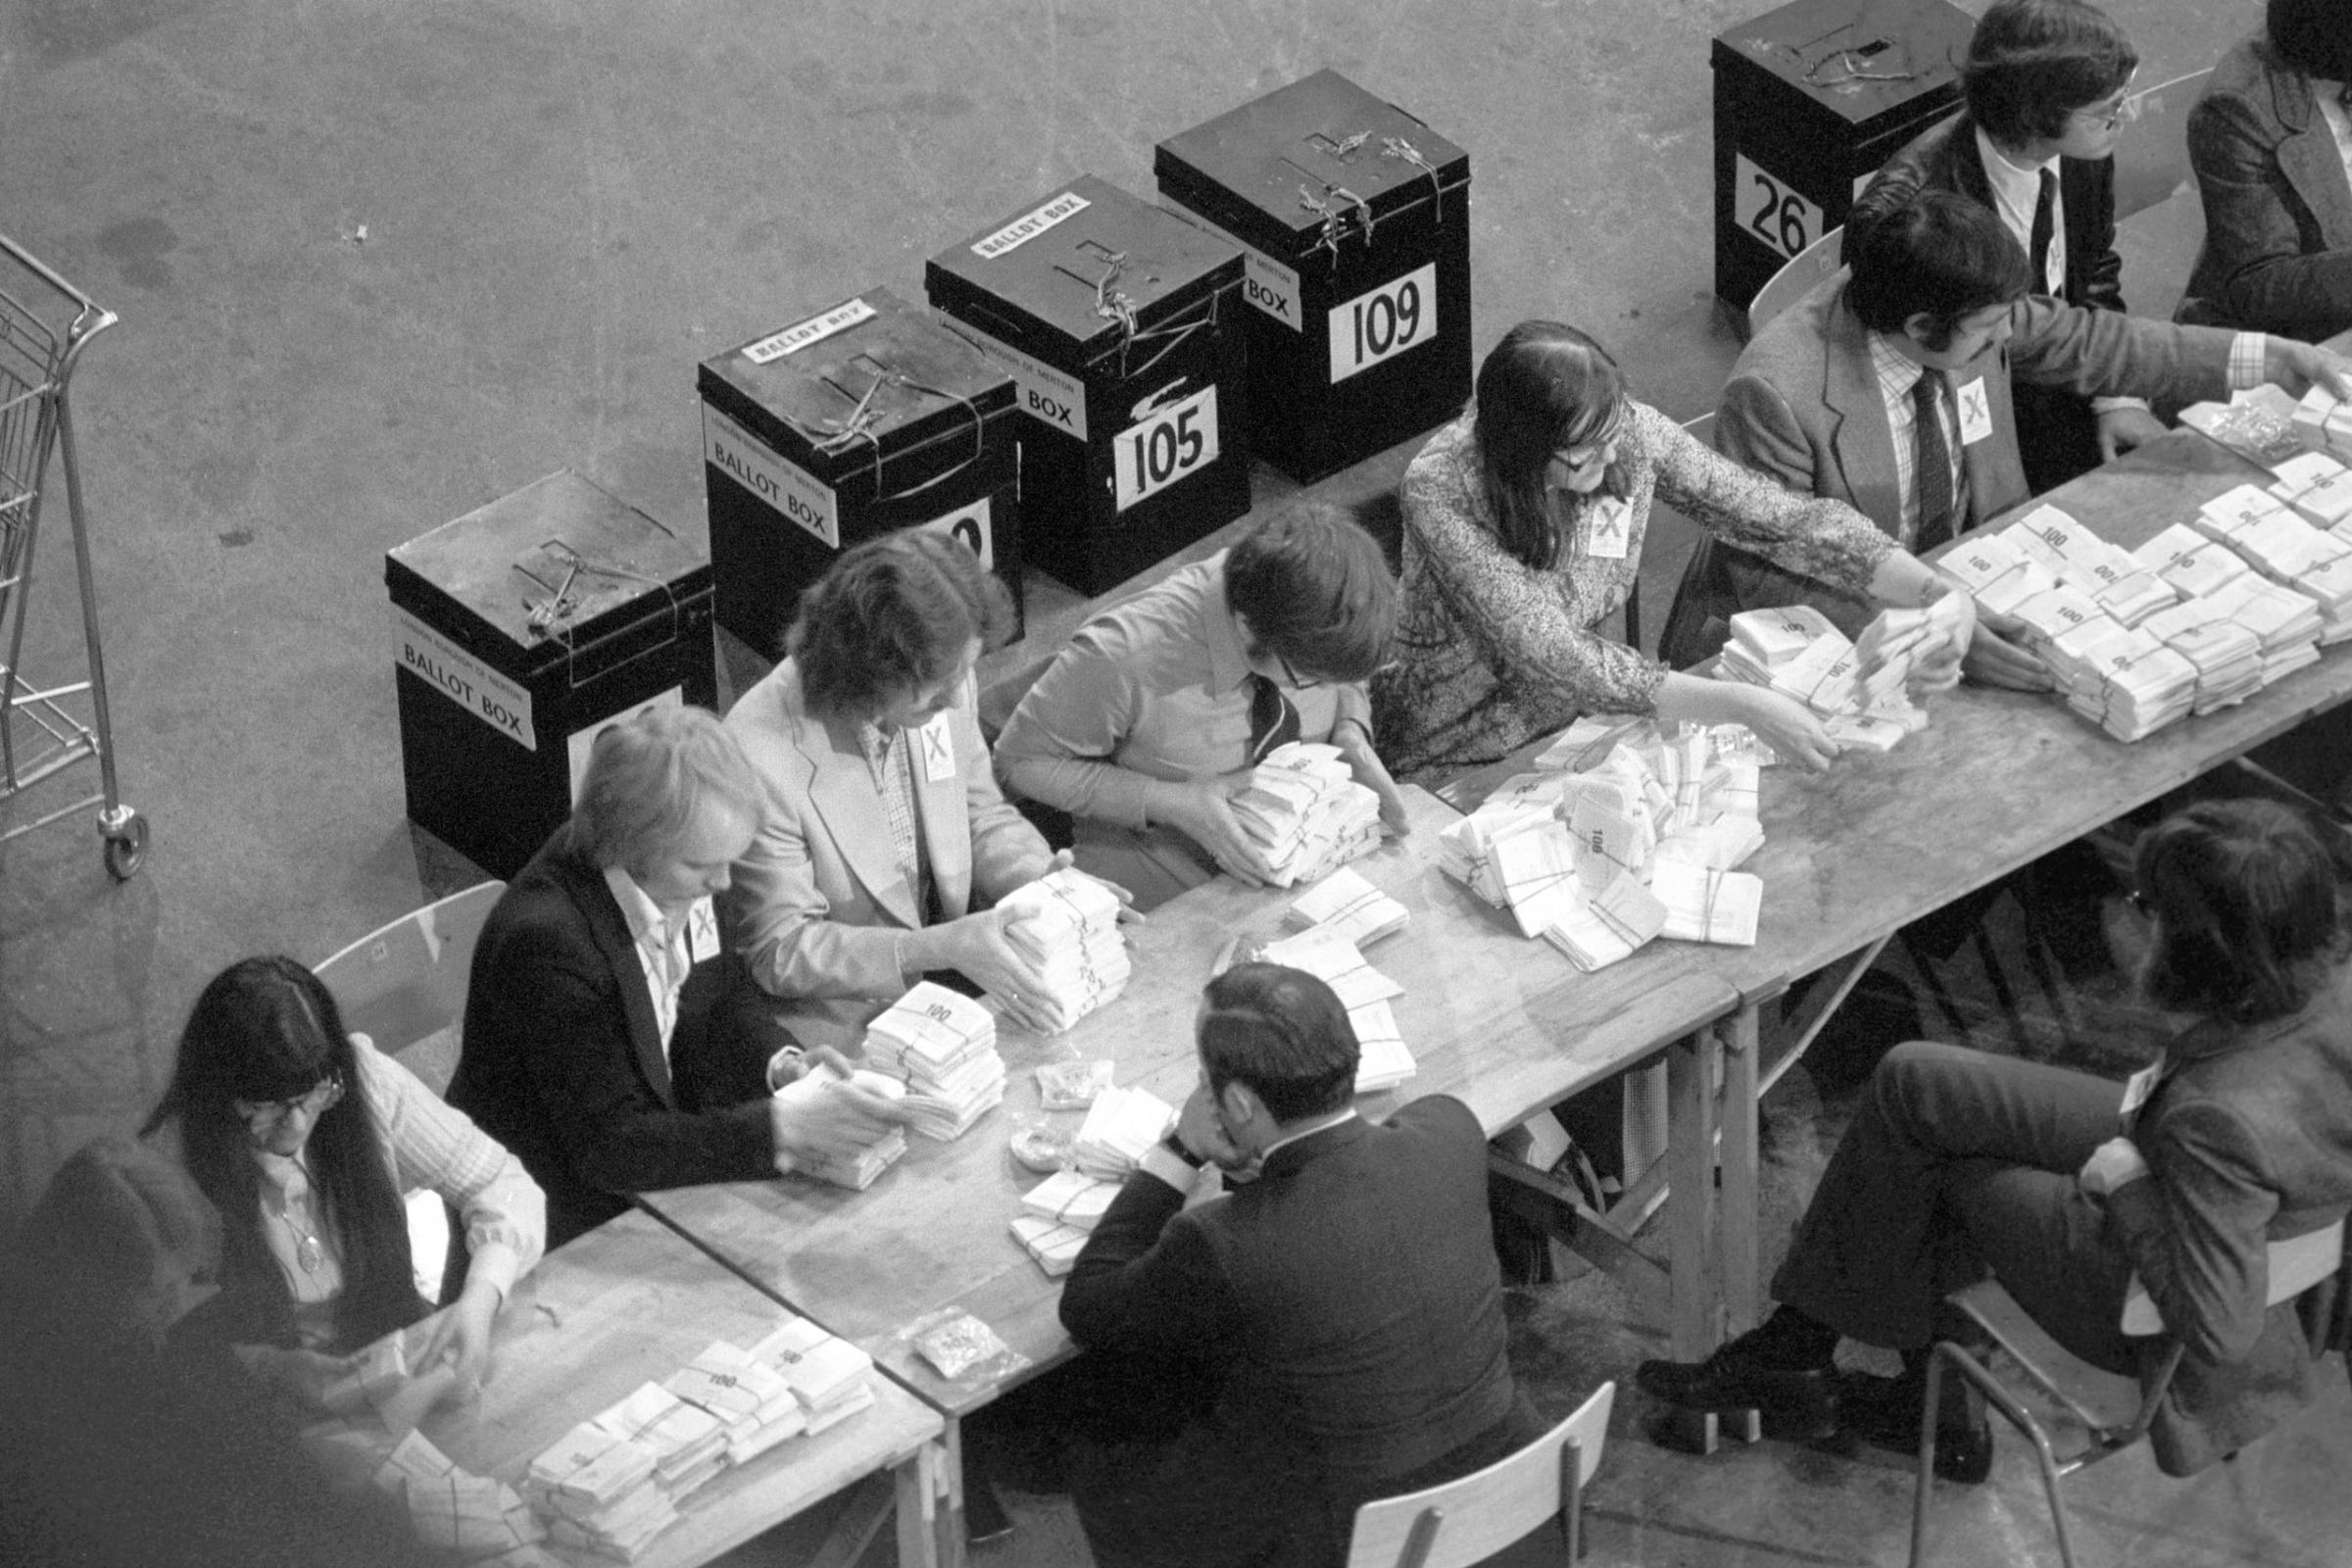 Ballot boxes are seen in the background as the count for the European Referendum gets underway, June 6, 1975.